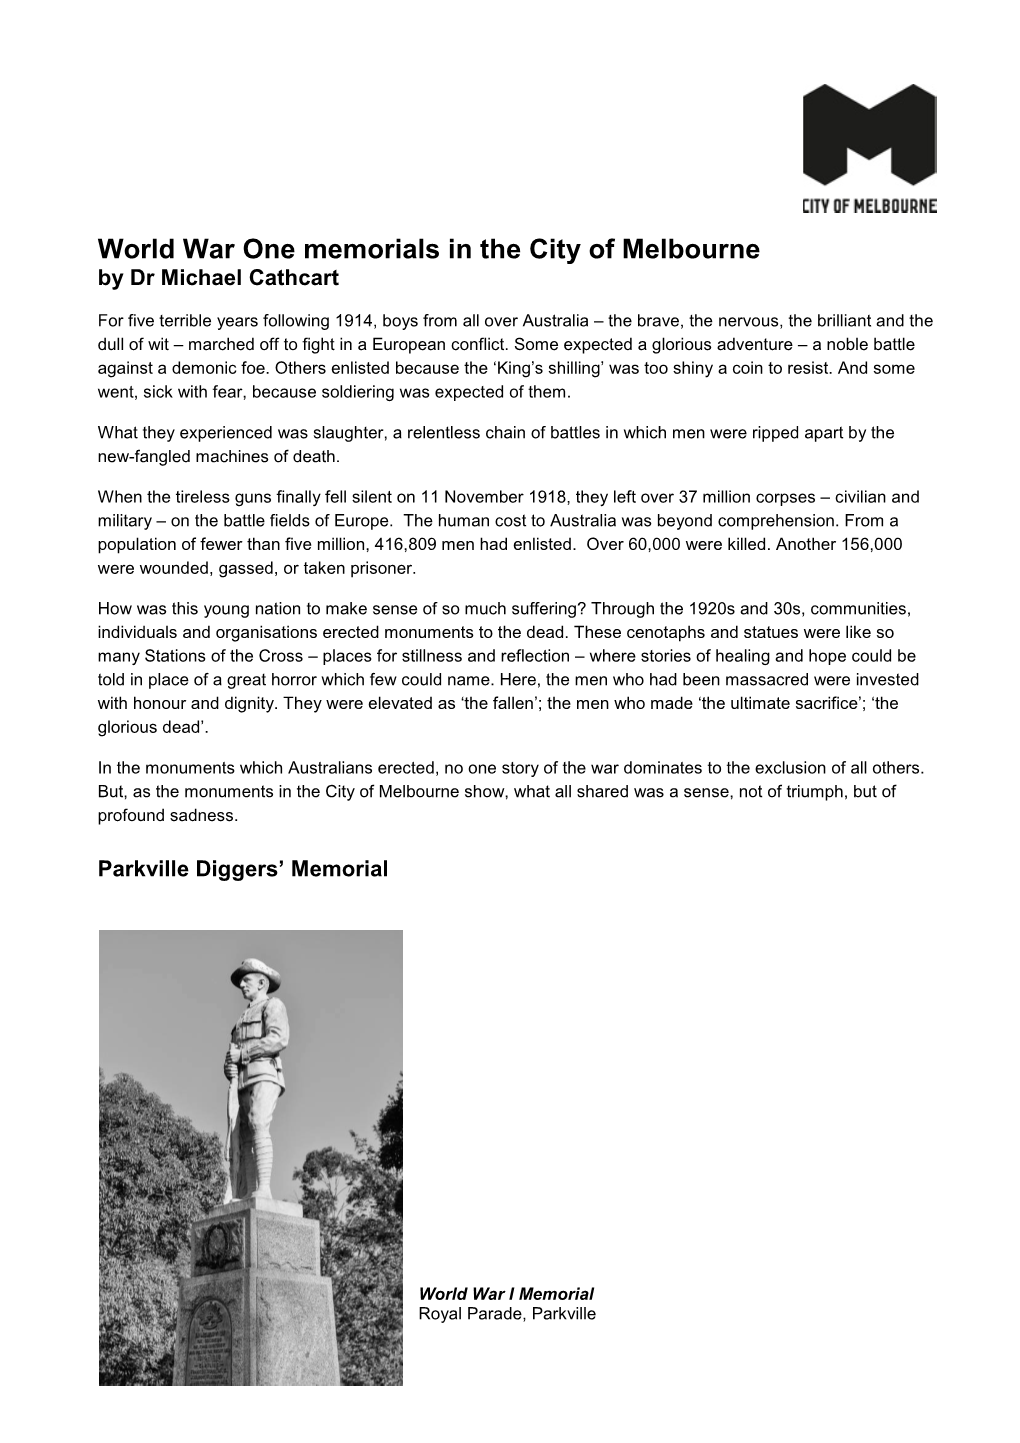 World War One Memorials in the City of Melbourne by Dr Michael Cathcart